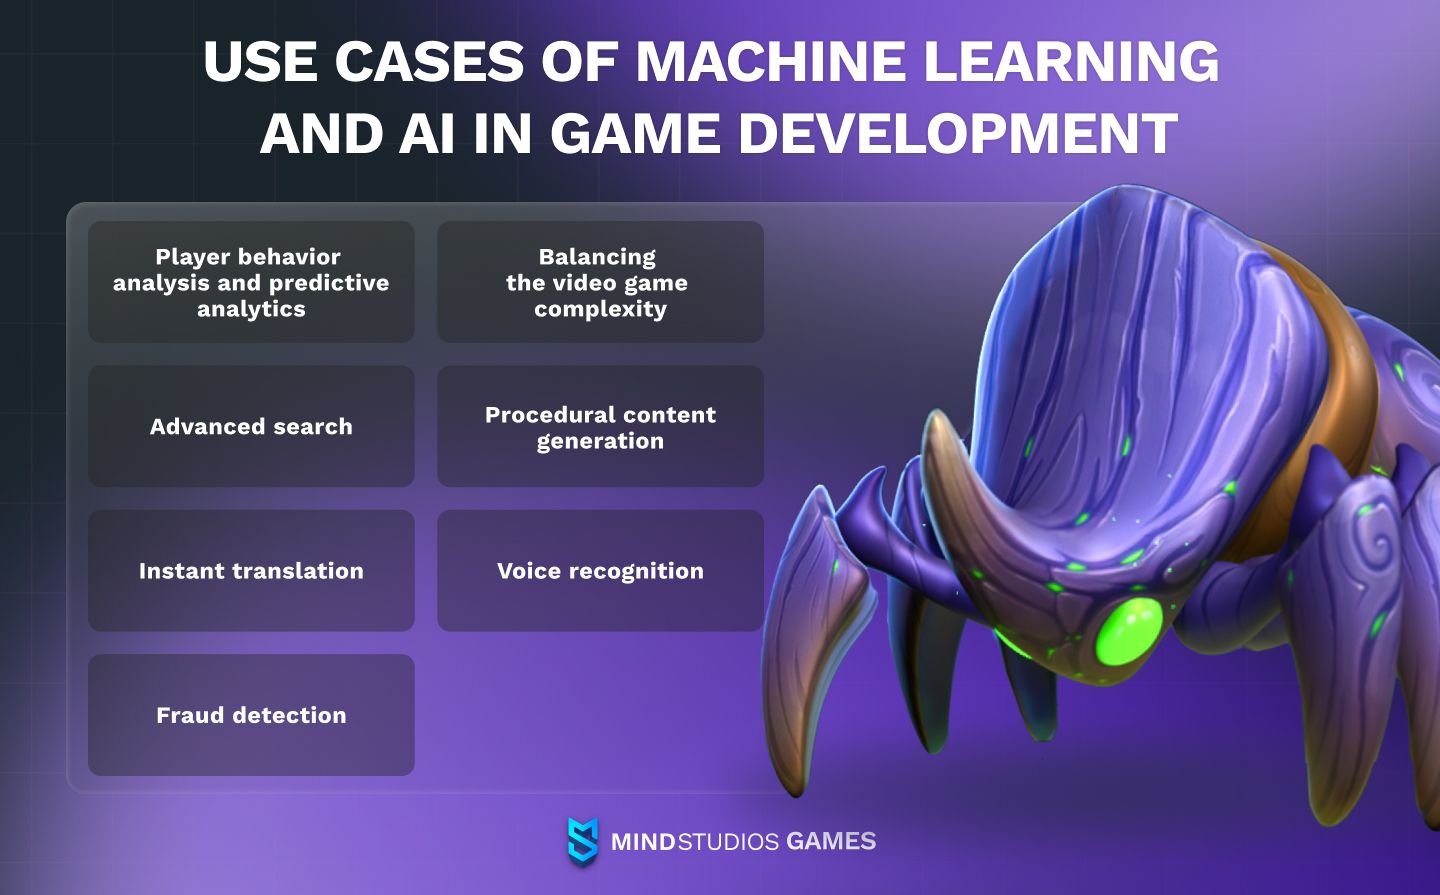 Use cases of machine learning and AI in game development